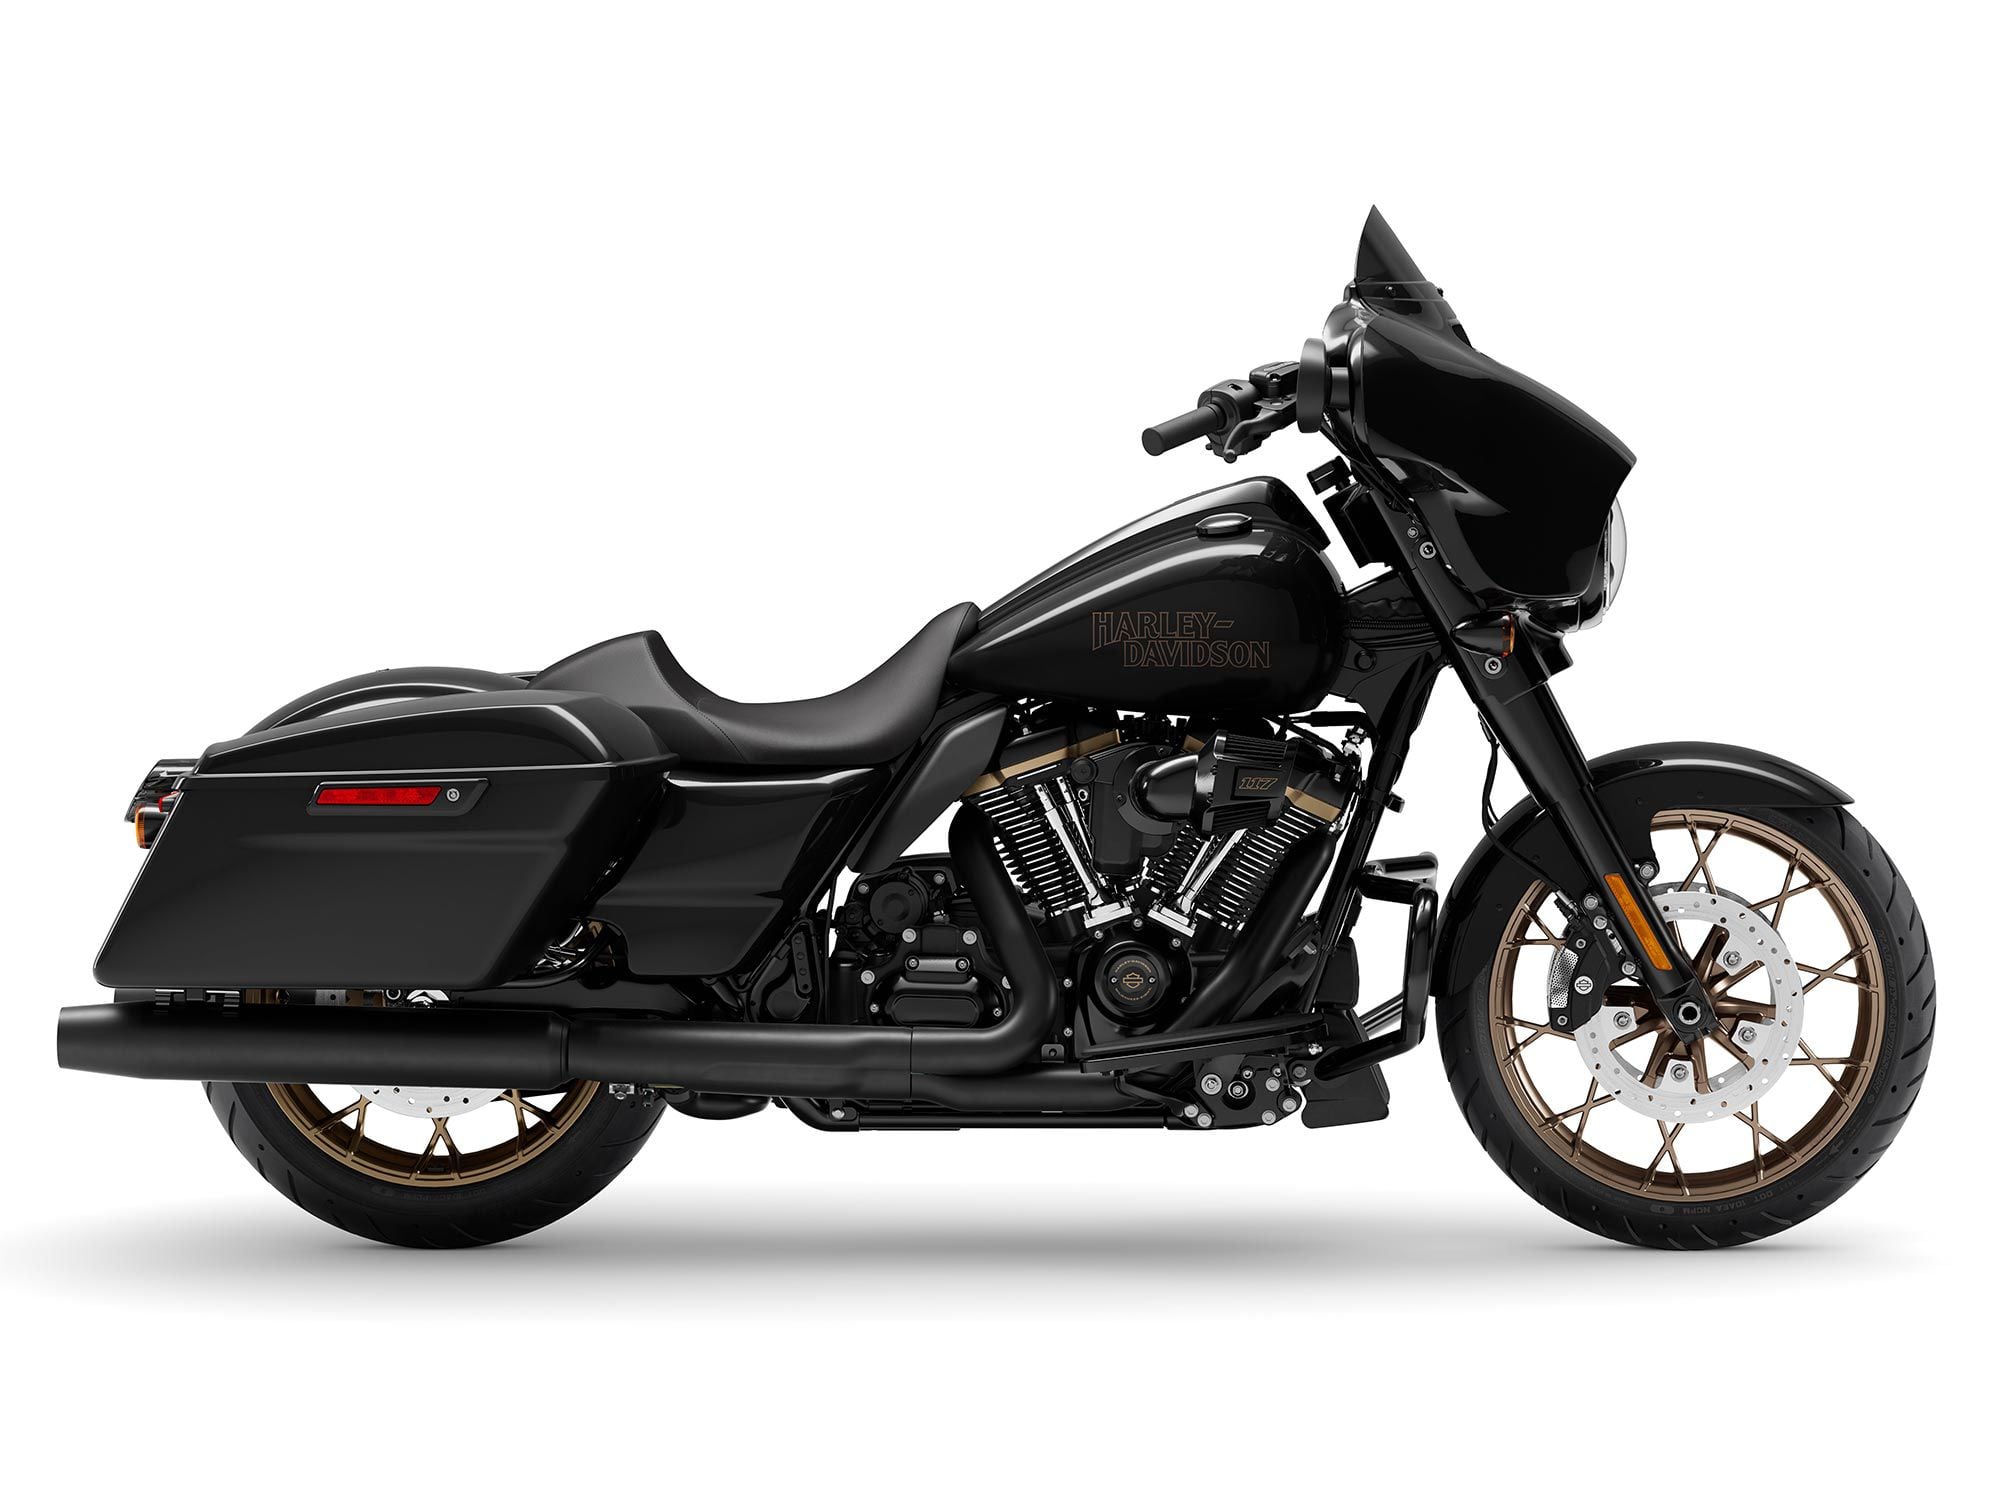 The current generation Street Glide ST.